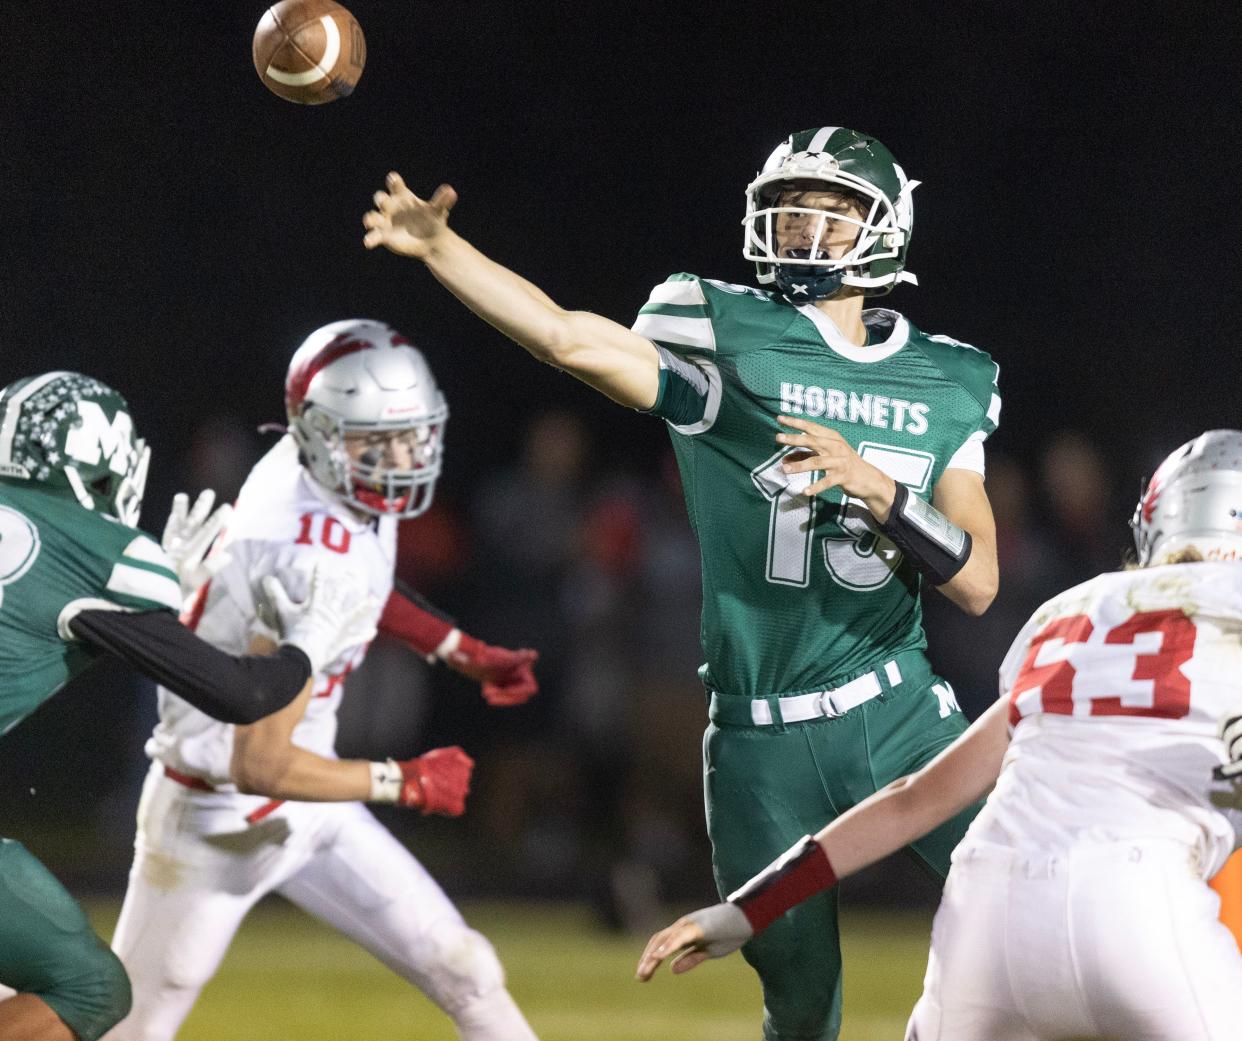 Malvern QB Jared Witherow accounted for four TDs Friday.